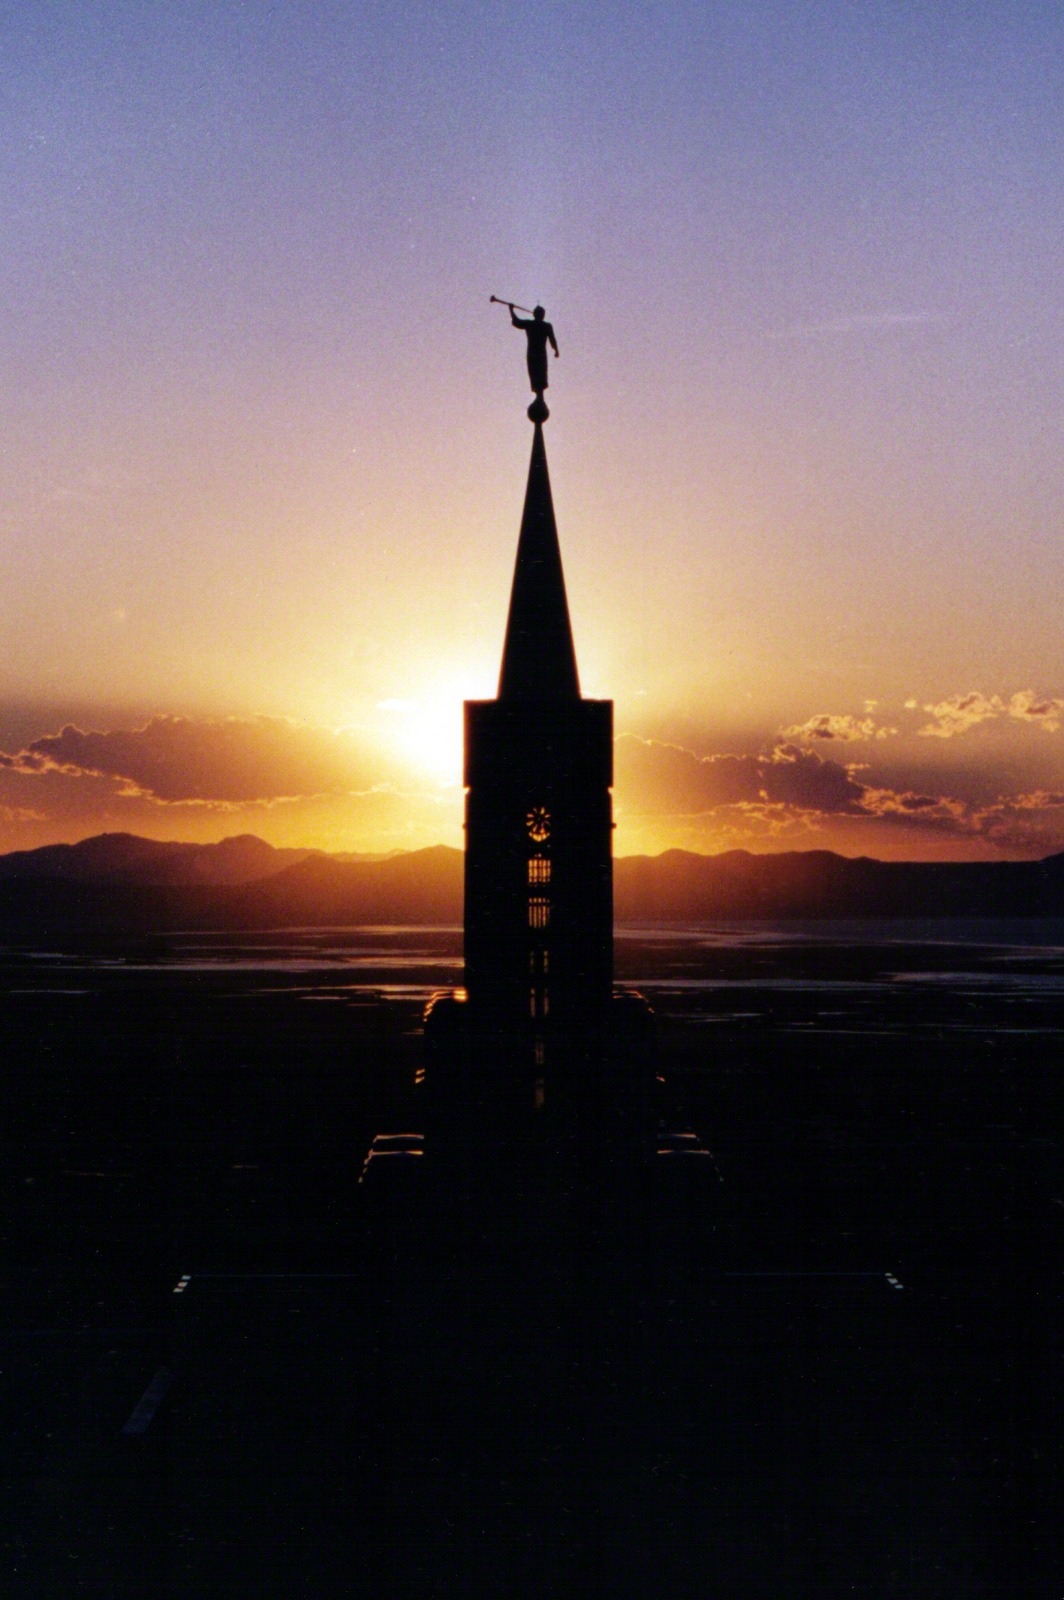 The Spire of the Bountiful Utah Temple at Sunset